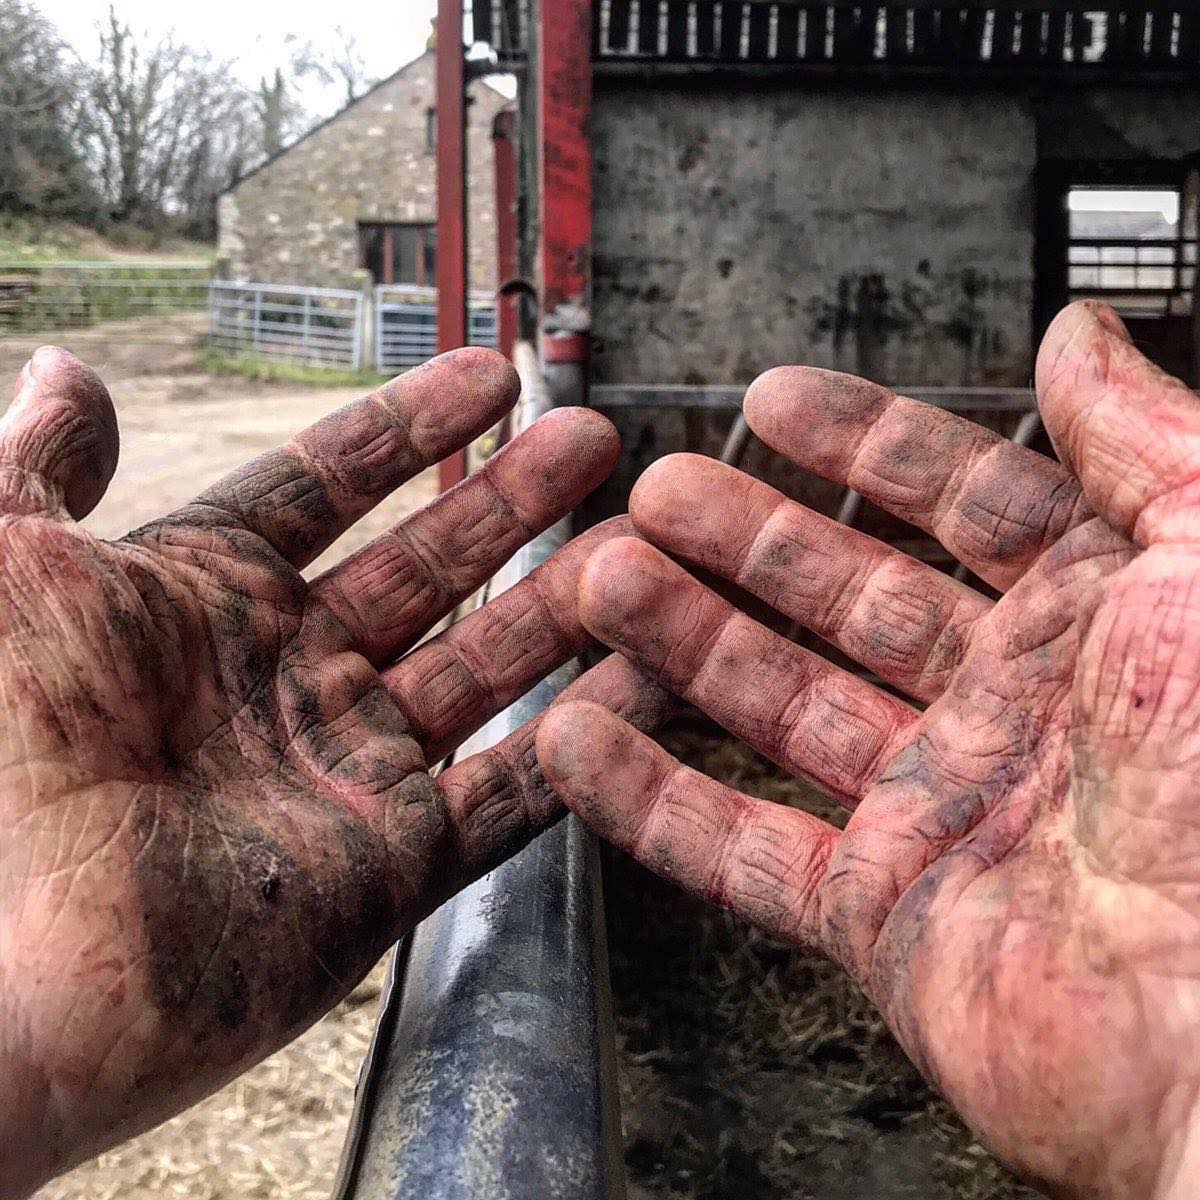 This is why farmers never have an upset stomach - natural immunity 💪🏼😉 📹 Insta: jrfromstrickley